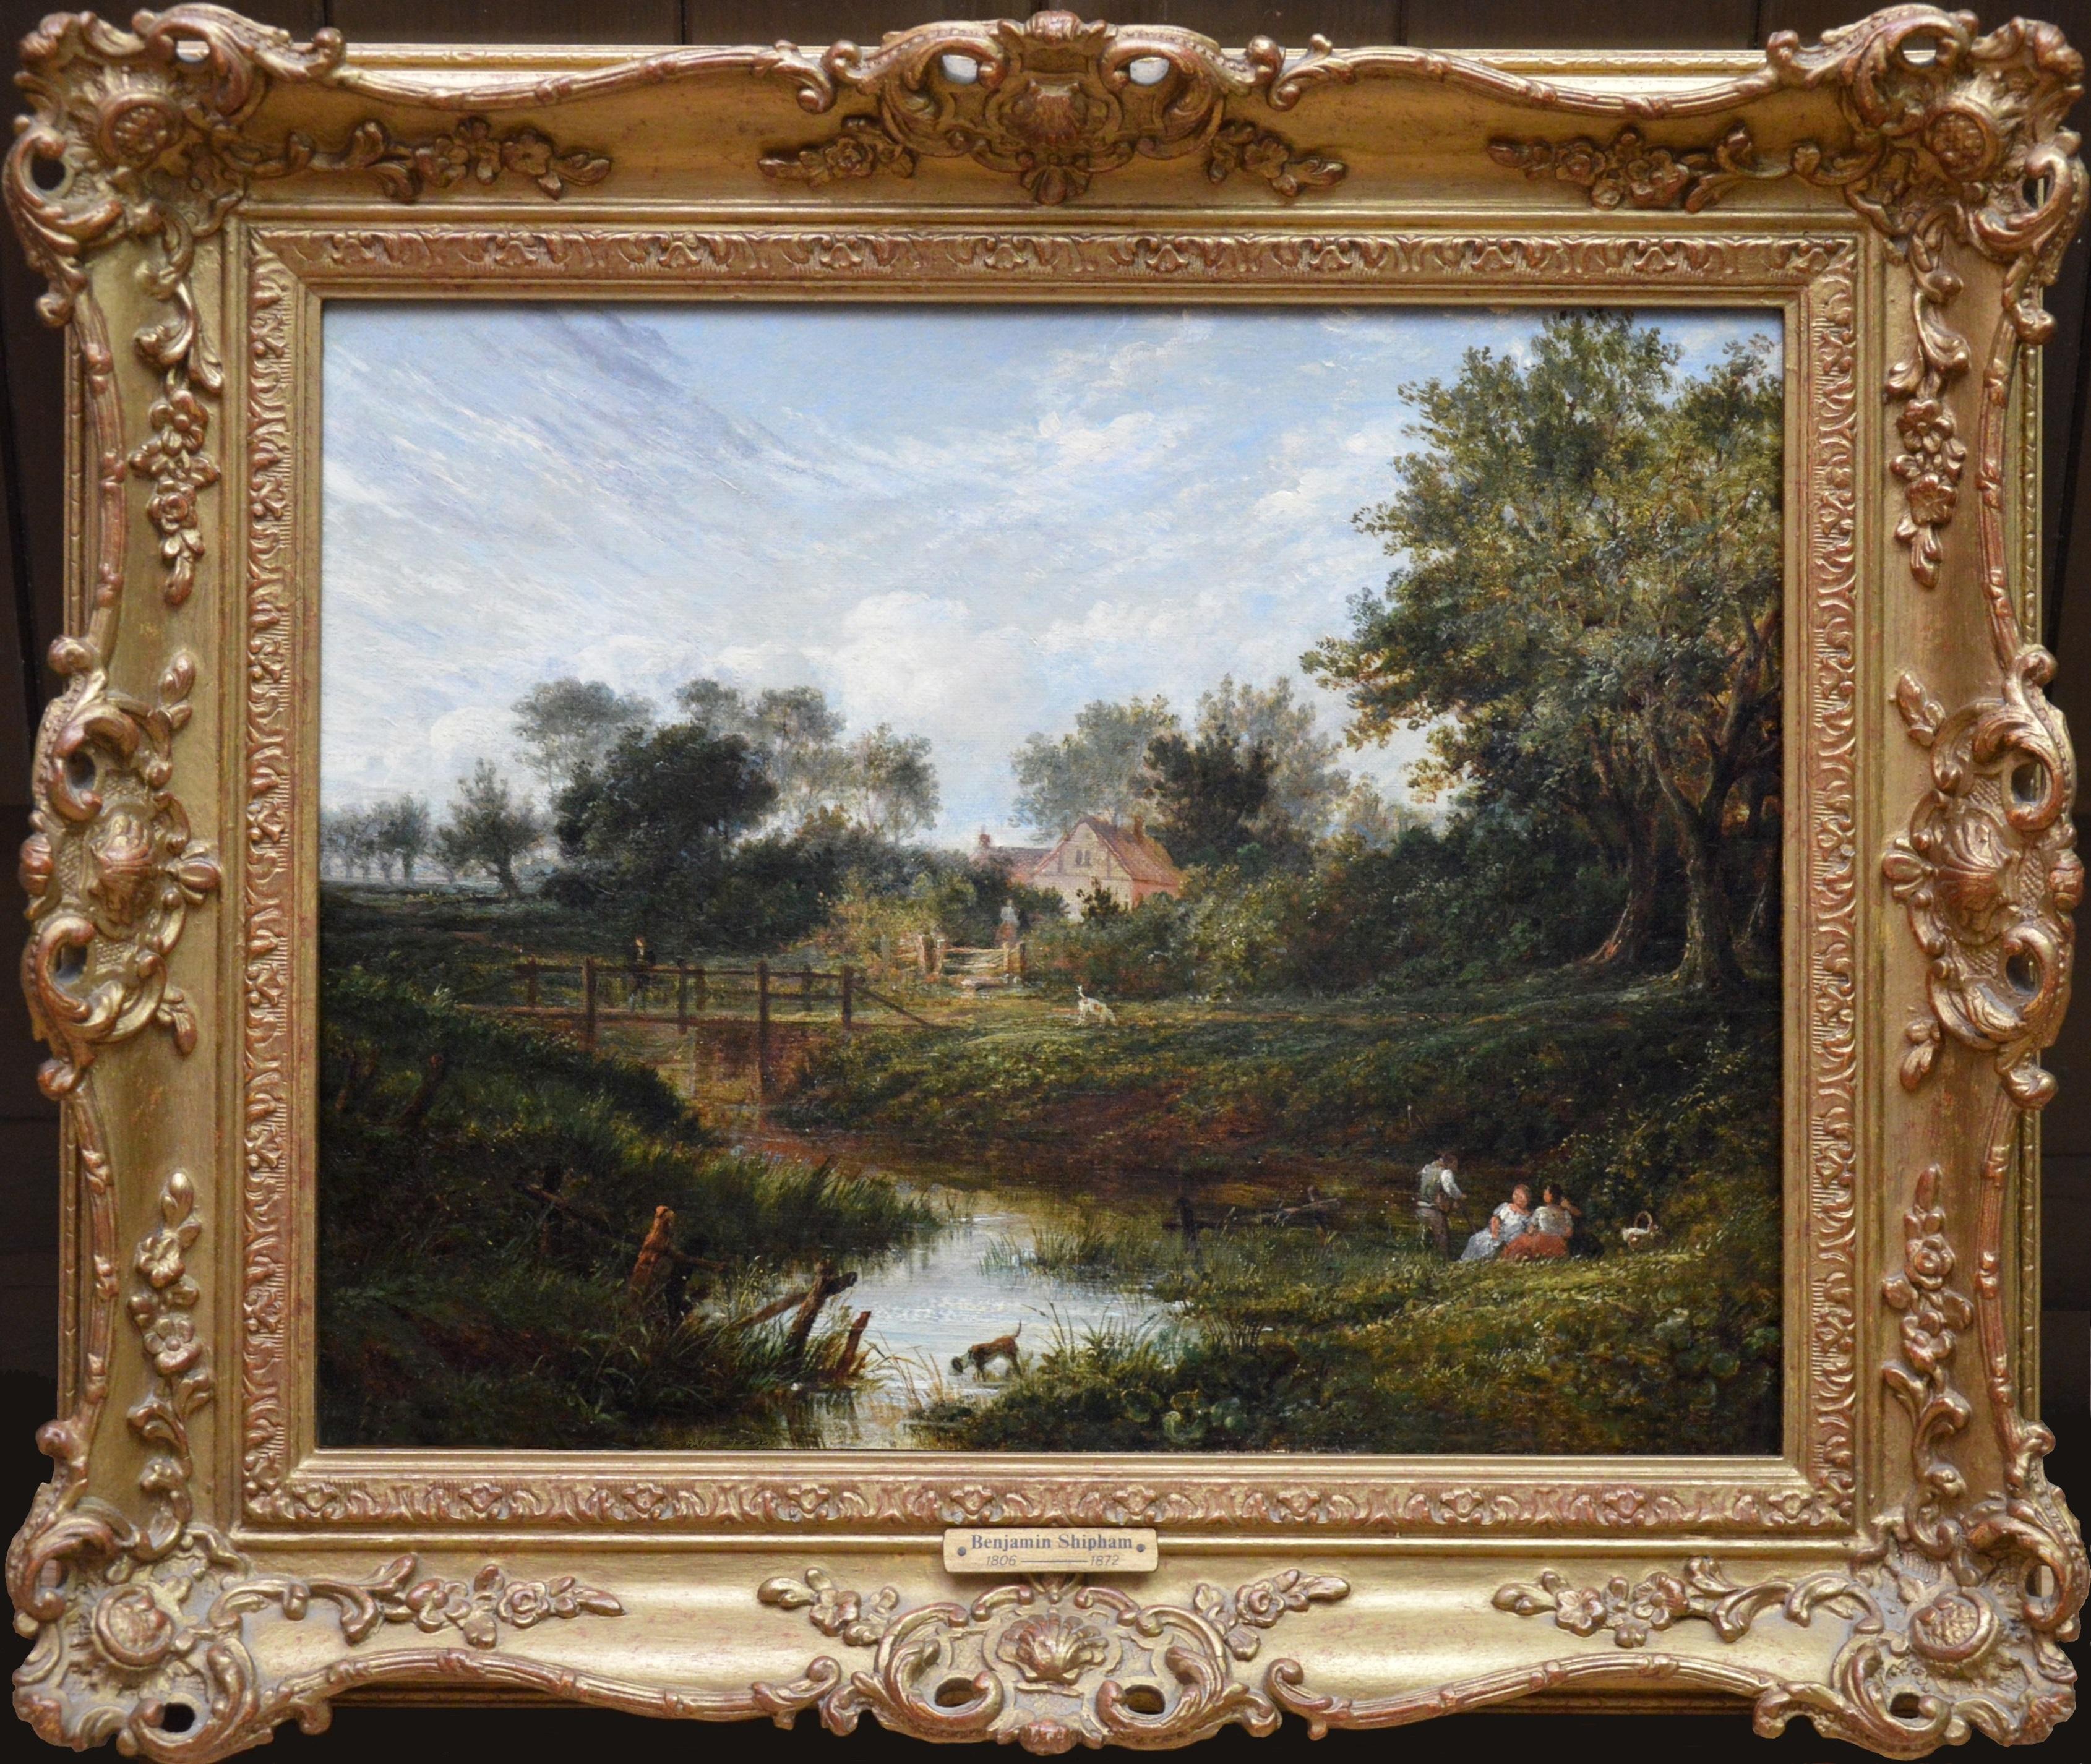 Benjamin Shipham Figurative Painting - 19th Century English Summer Landscape with Figures by a Stream